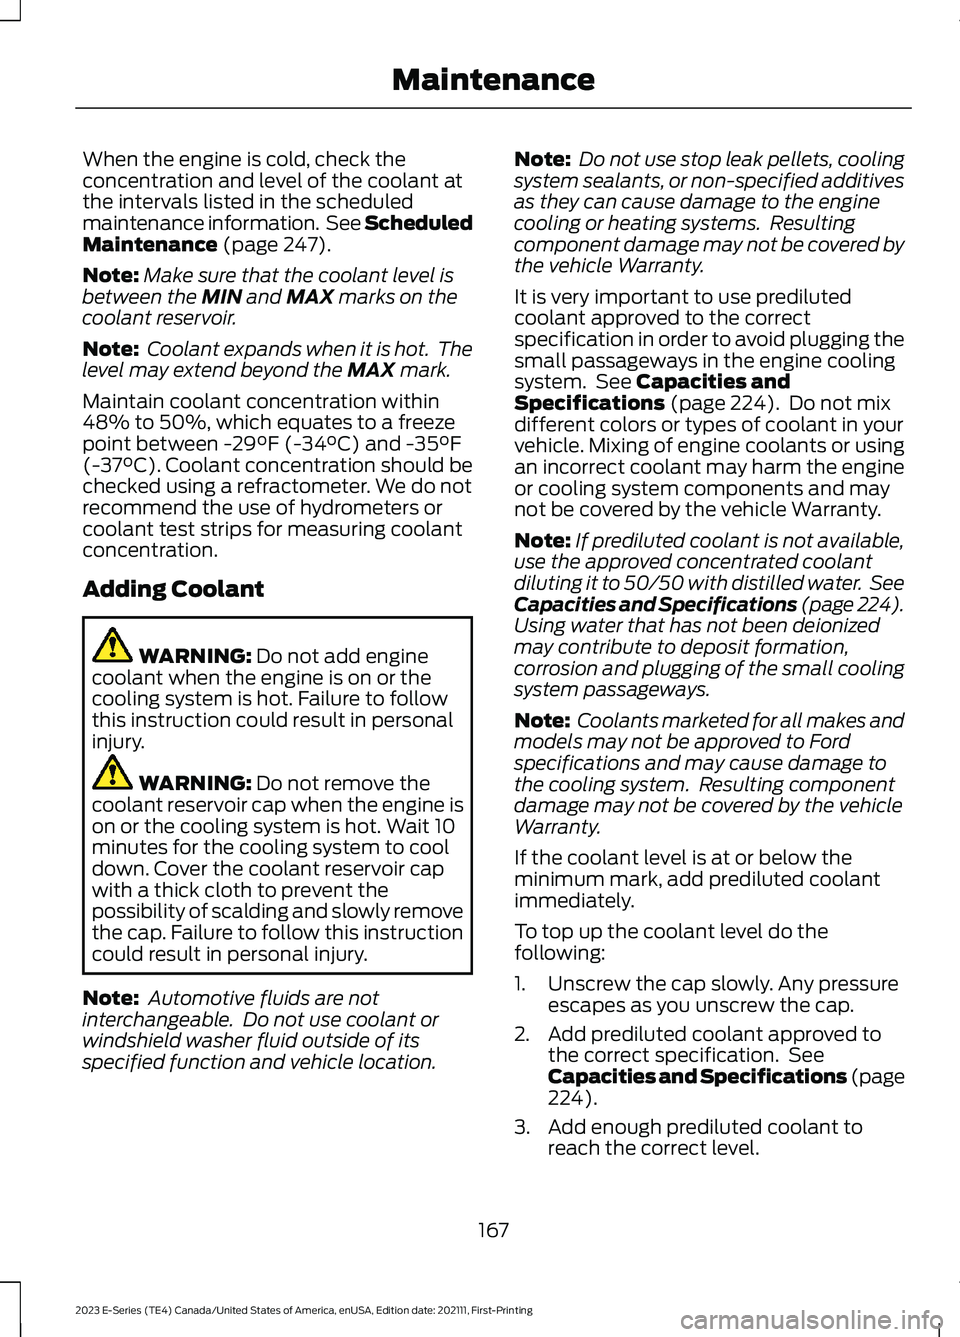 FORD E SERIES 2023  Owners Manual When the engine is cold, check theconcentration and level of the coolant atthe intervals listed in the scheduledmaintenance information. See ScheduledMaintenance (page 247).
Note:Make sure that the co